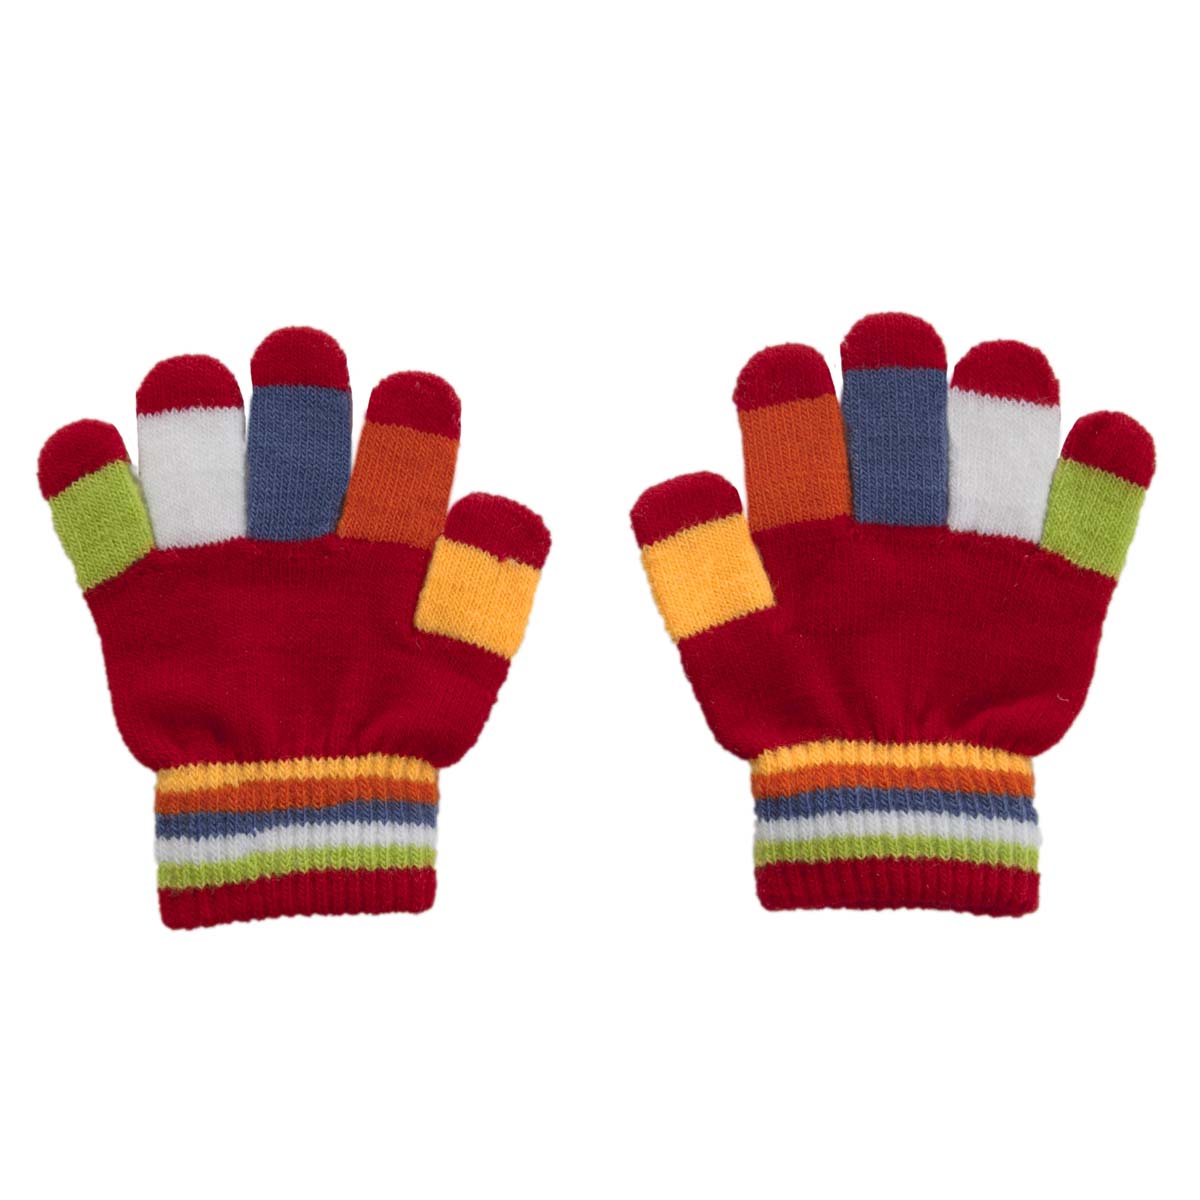 red wooly gloves